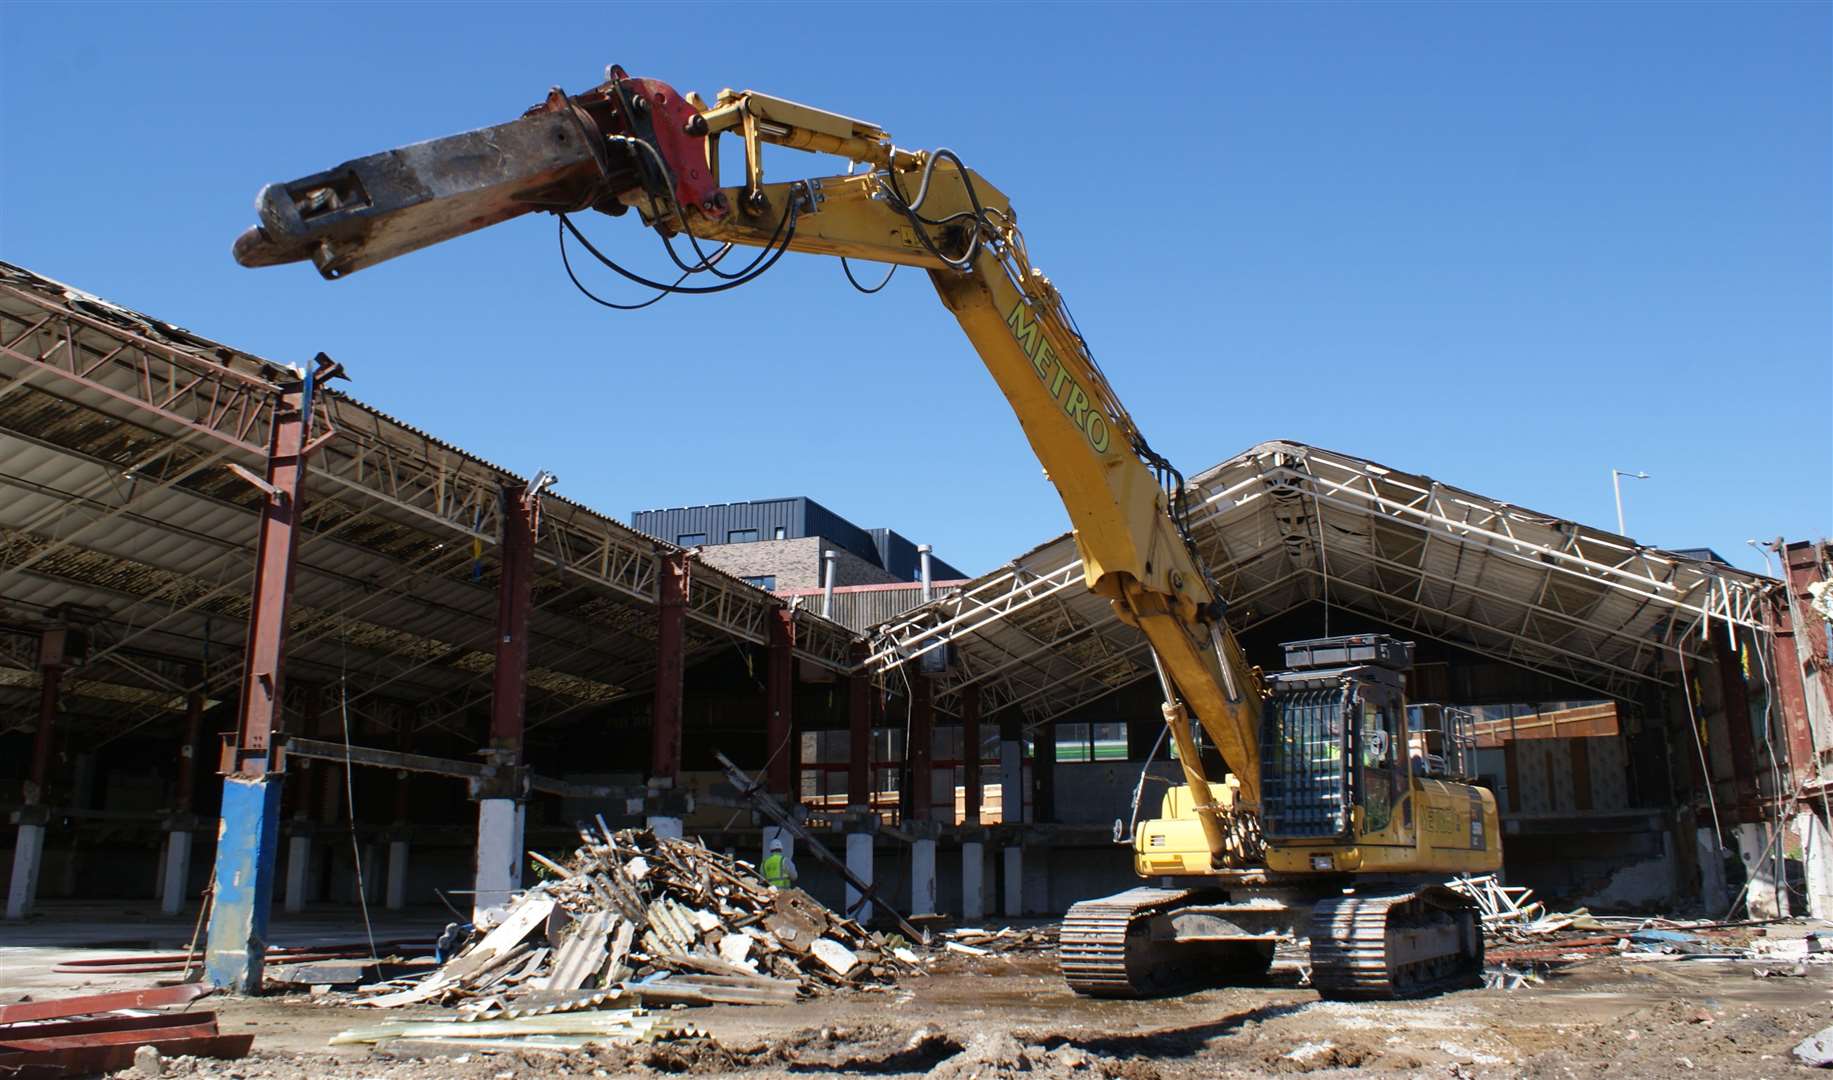 The HomePlus store is being demolished. Picture: Jade Rose, Metro Deconstruction Services Ltd